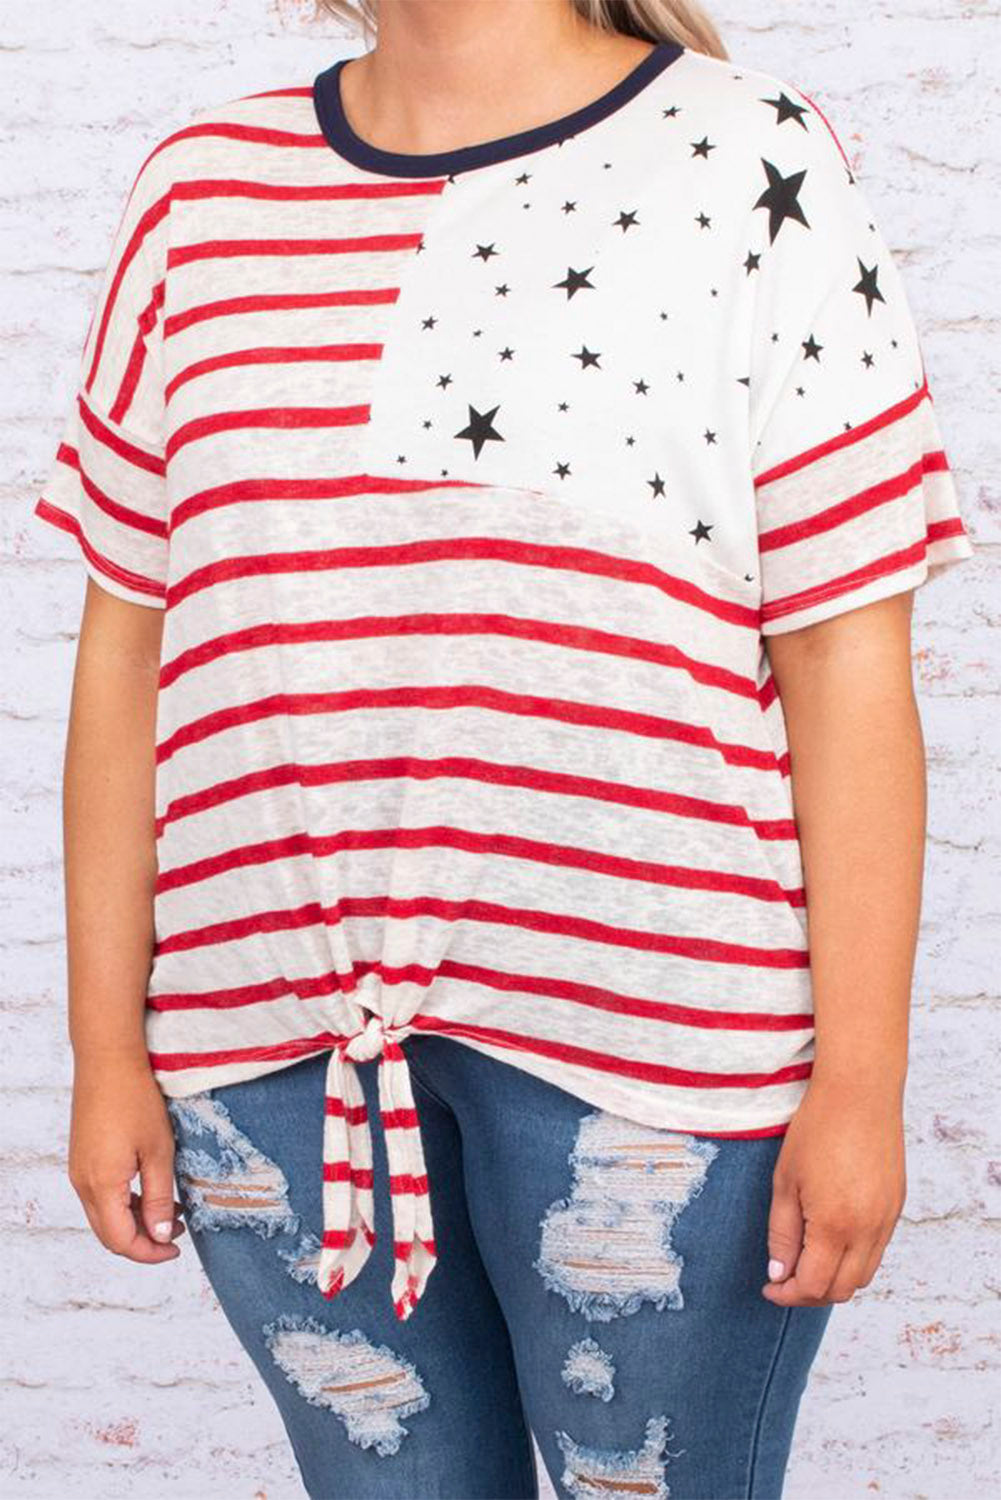 July 4th National Day Flag Print Plus Size Tee with Knot